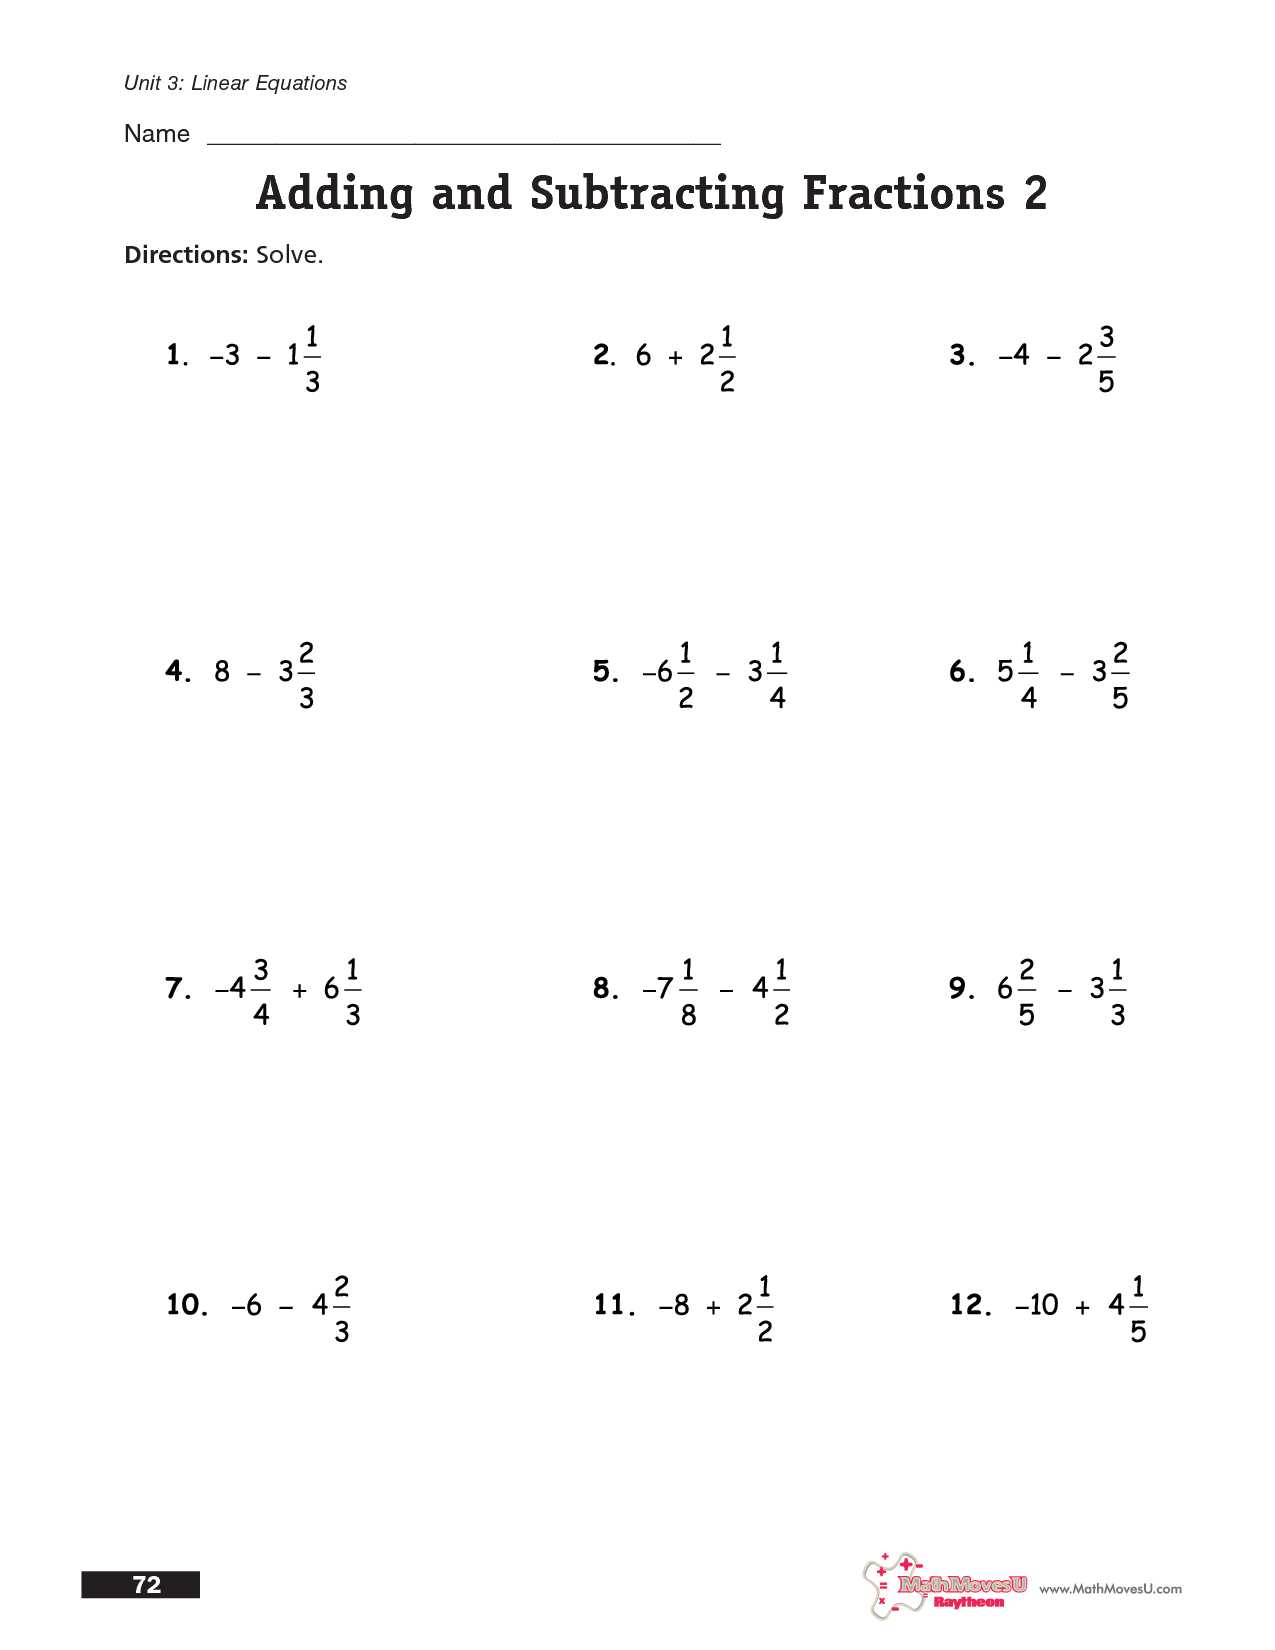 Solving Multiplication and Division Equations Worksheets Along with Grade 6 Math Fractions Worksheets Luxury Adding and Subtracting